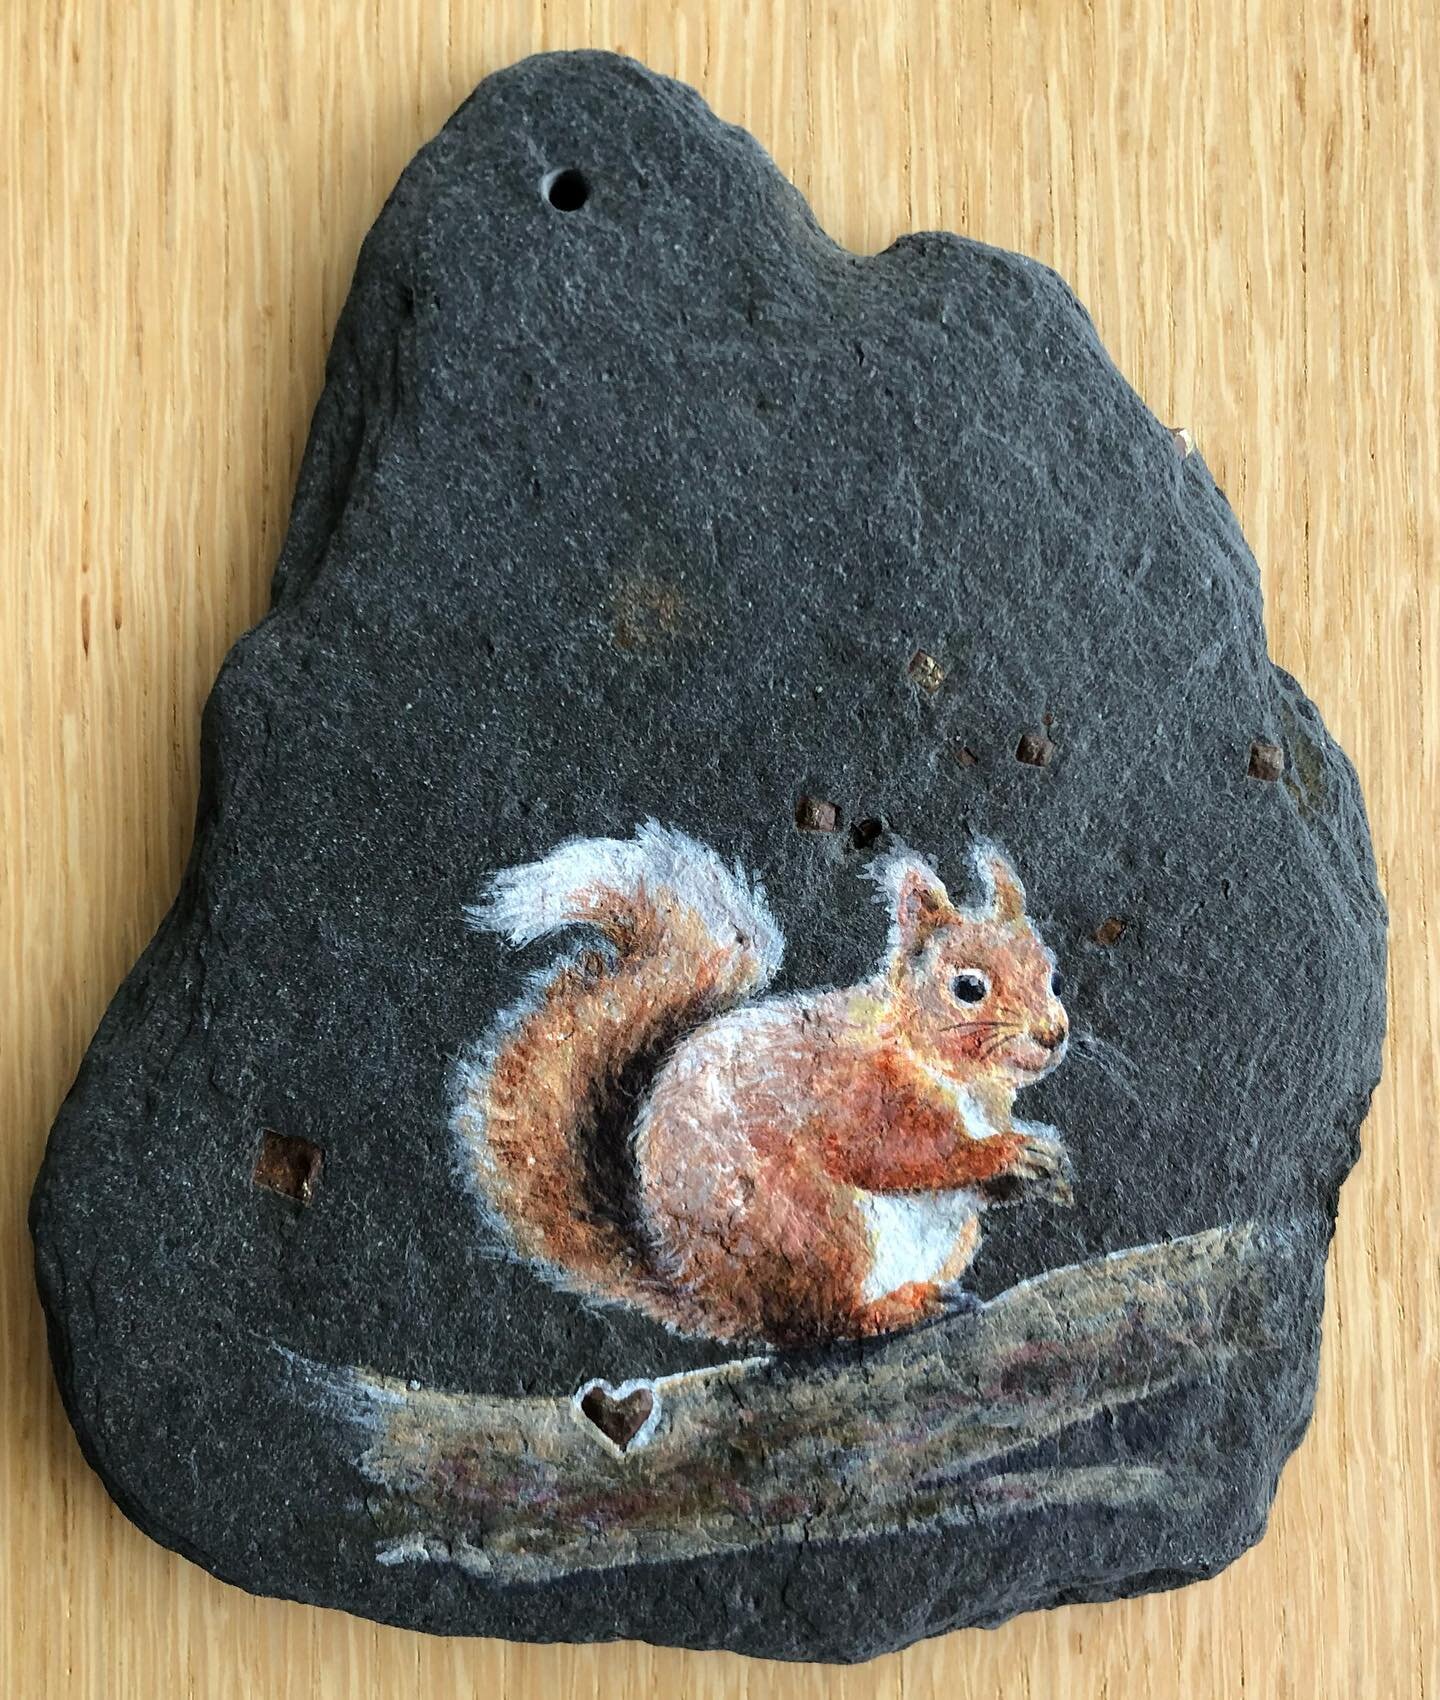 An affordable wee gift for someone special&hellip;hand-painted on found slate. Available this Saturday at the Echt Daffodil Tea 2 - 4pm in the Echt Community Hall, Aberdeenshire.  #redsquirrel #paintingonslate #aberdeenshire #wildlife #nature #handma